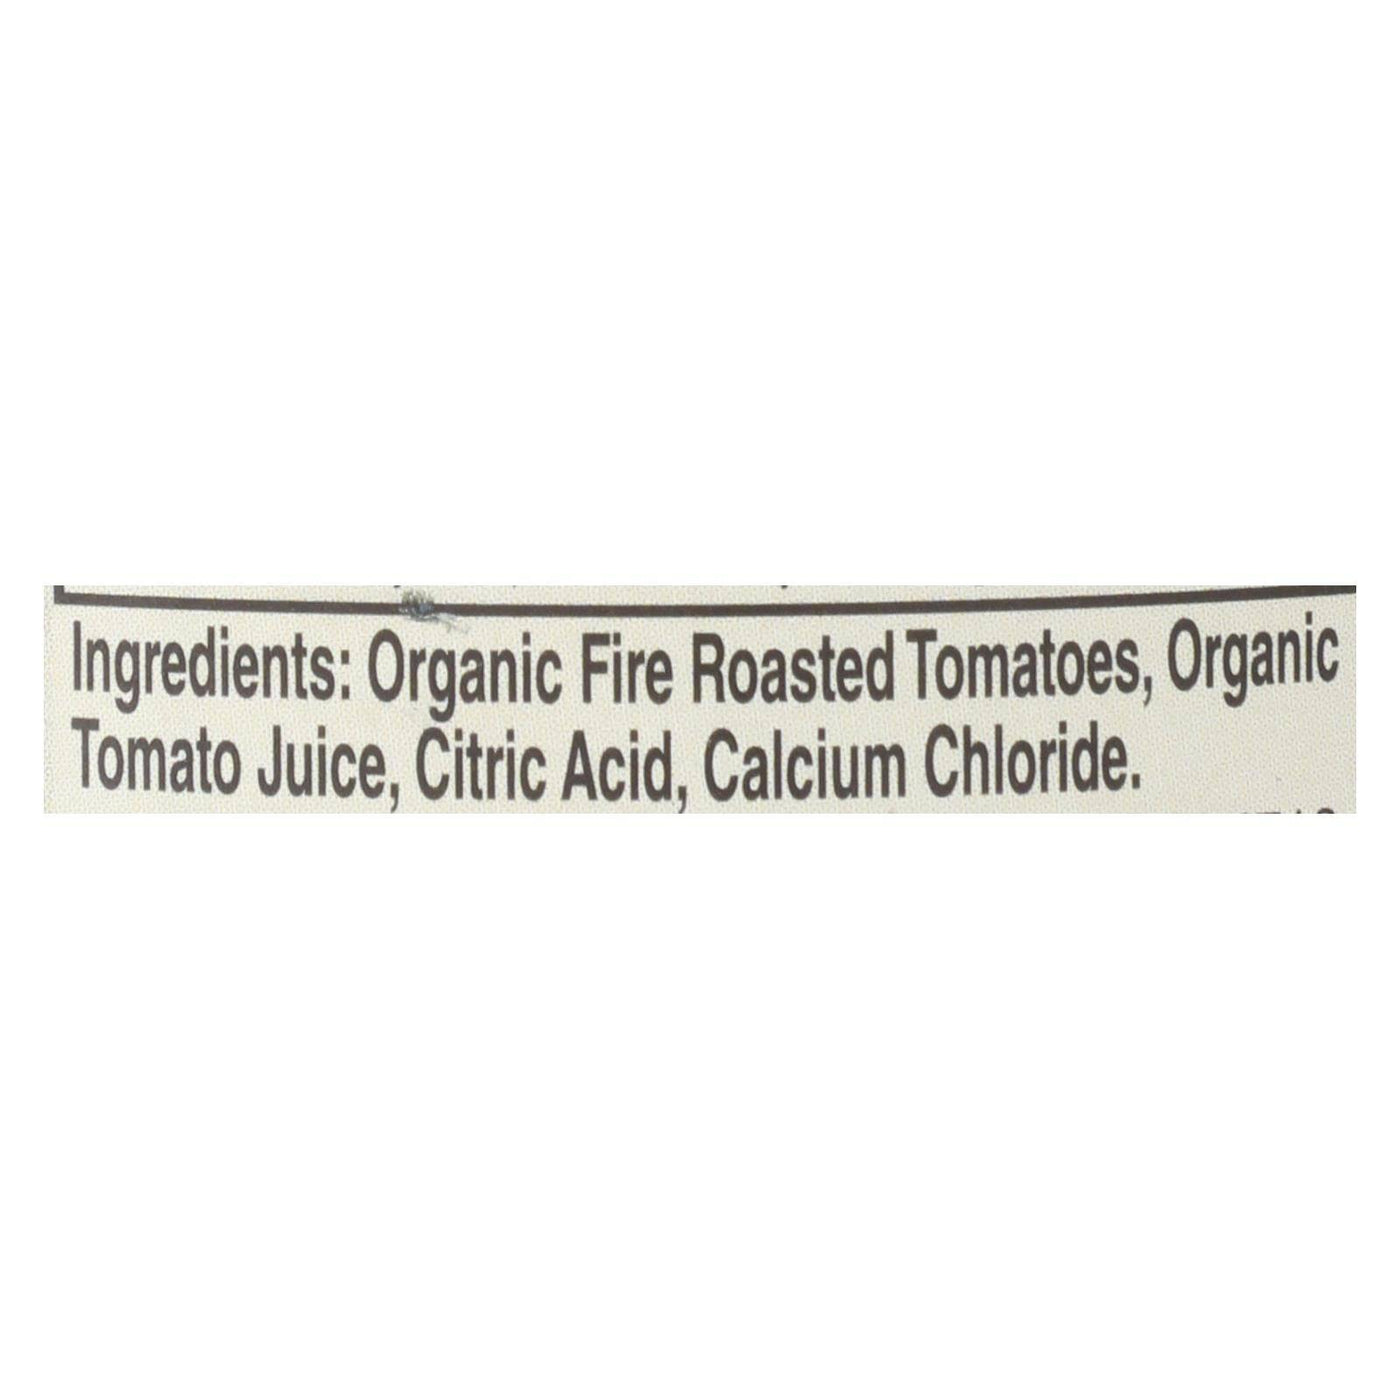 Buy Muir Glen Diced Fire Roasted Tomato No Salt - Tomato - Case Of 12 - 14.5 Oz.  at OnlyNaturals.us